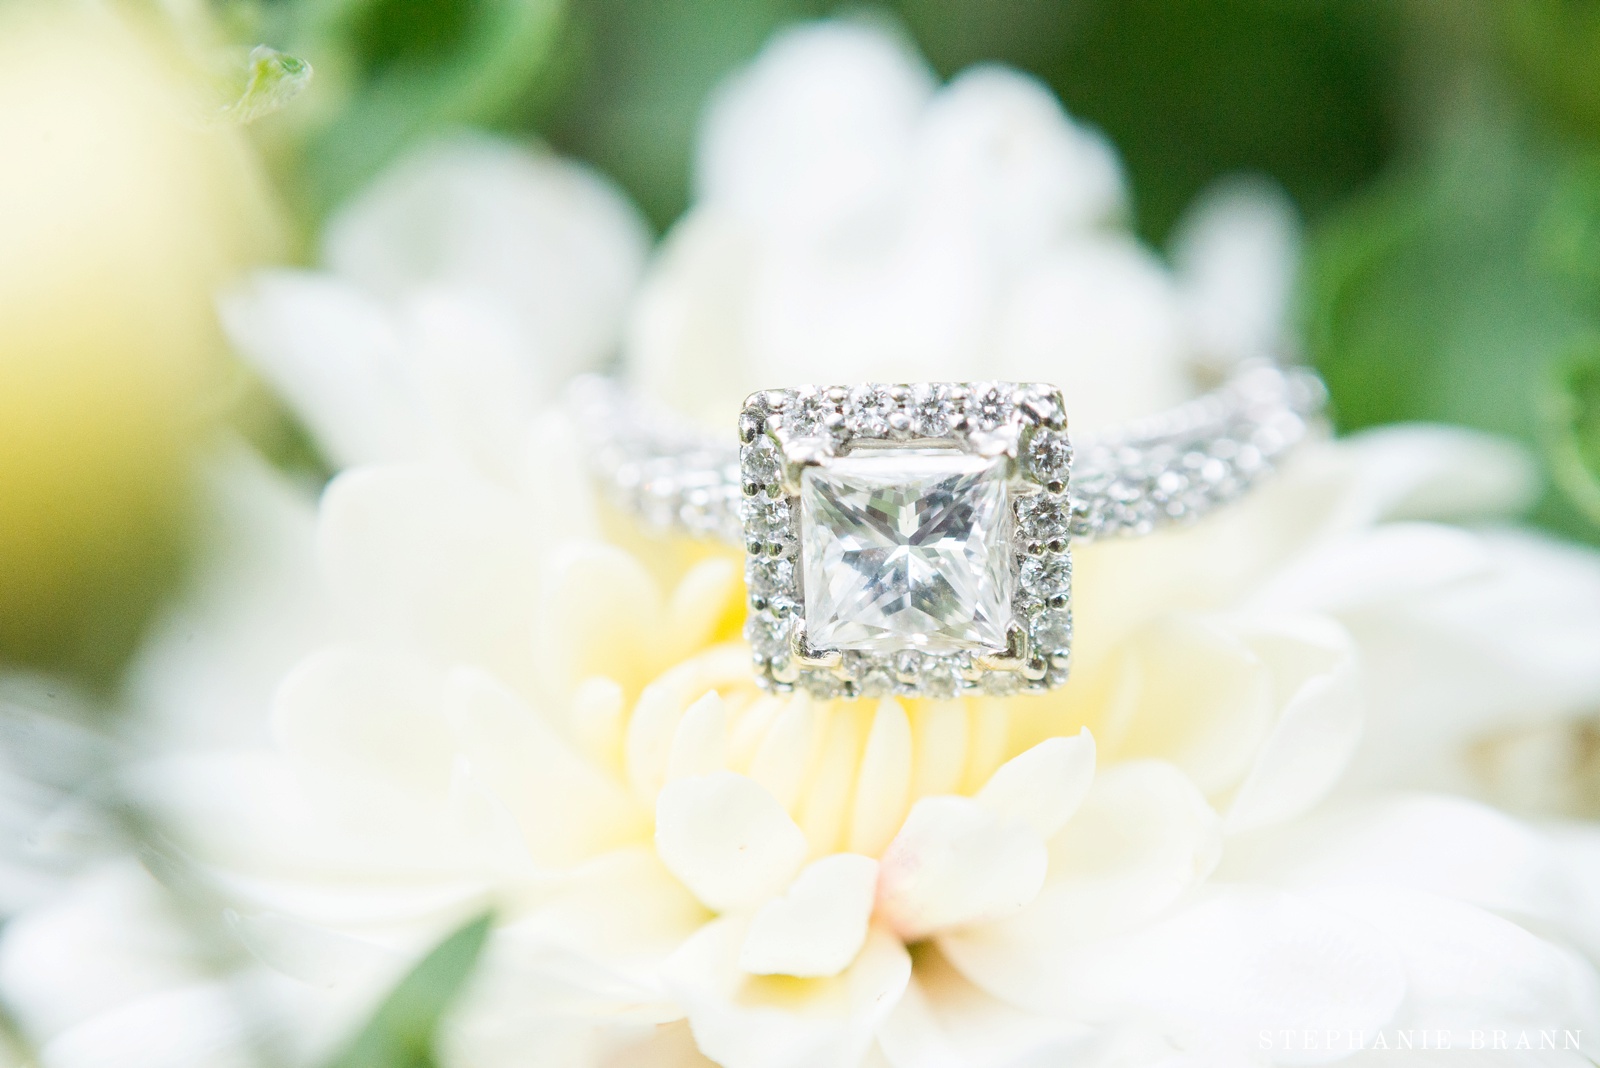 shiny-blingy-engagement-ring-with-a-halo